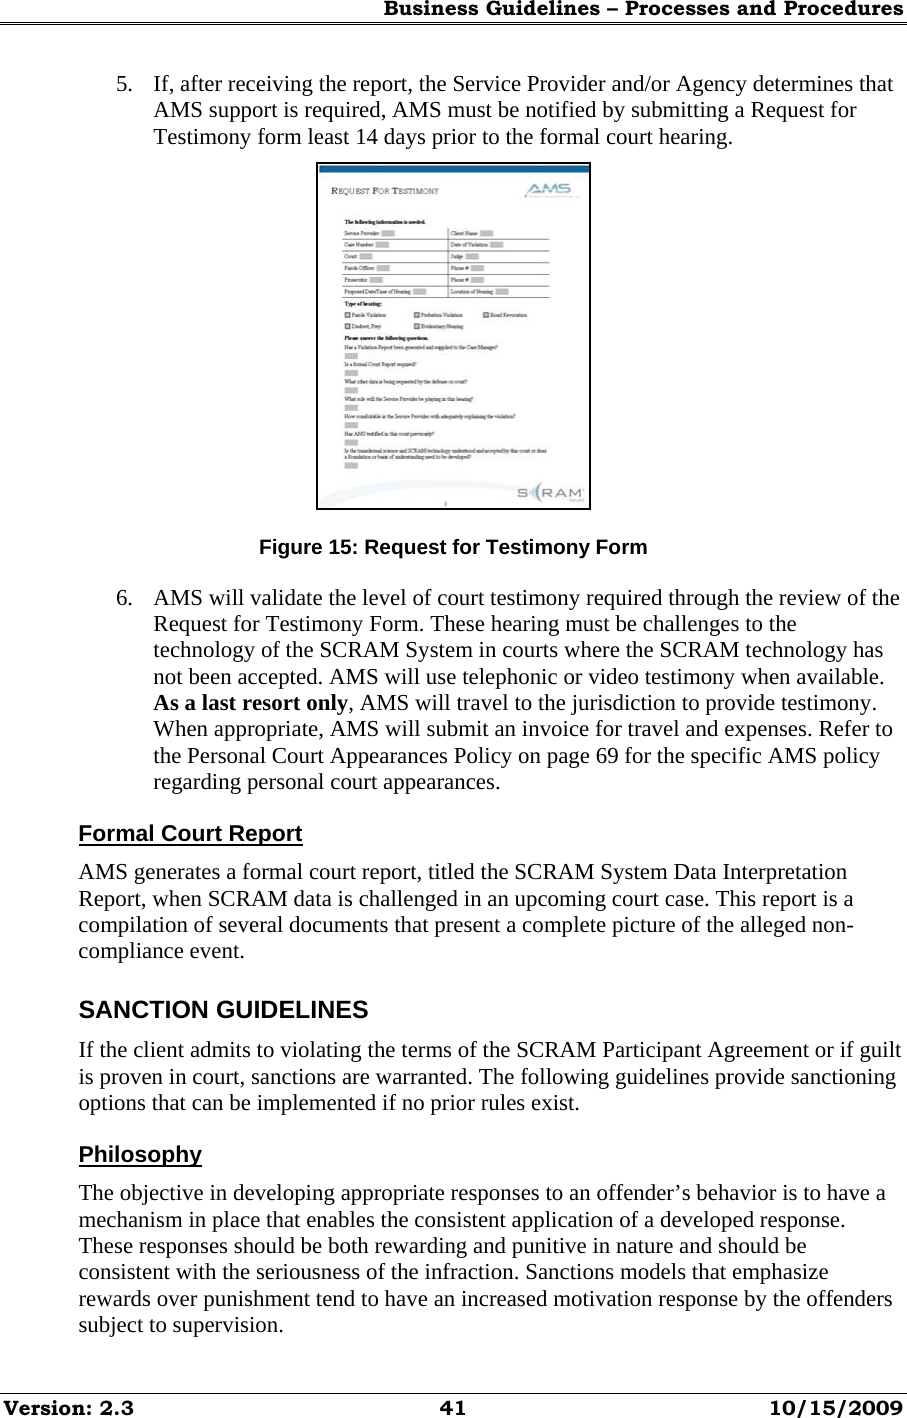 Business Guidelines – Processes and Procedures Version: 2.3  41  10/15/2009 5. If, after receiving the report, the Service Provider and/or Agency determines that AMS support is required, AMS must be notified by submitting a Request for Testimony form least 14 days prior to the formal court hearing.  Figure 15: Request for Testimony Form 6. AMS will validate the level of court testimony required through the review of the Request for Testimony Form. These hearing must be challenges to the technology of the SCRAM System in courts where the SCRAM technology has not been accepted. AMS will use telephonic or video testimony when available. As a last resort only, AMS will travel to the jurisdiction to provide testimony. When appropriate, AMS will submit an invoice for travel and expenses. Refer to the Personal Court Appearances Policy on page 69 for the specific AMS policy regarding personal court appearances. Formal Court Report AMS generates a formal court report, titled the SCRAM System Data Interpretation Report, when SCRAM data is challenged in an upcoming court case. This report is a compilation of several documents that present a complete picture of the alleged non-compliance event. SANCTION GUIDELINES If the client admits to violating the terms of the SCRAM Participant Agreement or if guilt is proven in court, sanctions are warranted. The following guidelines provide sanctioning options that can be implemented if no prior rules exist. Philosophy The objective in developing appropriate responses to an offender’s behavior is to have a mechanism in place that enables the consistent application of a developed response. These responses should be both rewarding and punitive in nature and should be consistent with the seriousness of the infraction. Sanctions models that emphasize rewards over punishment tend to have an increased motivation response by the offenders subject to supervision. 